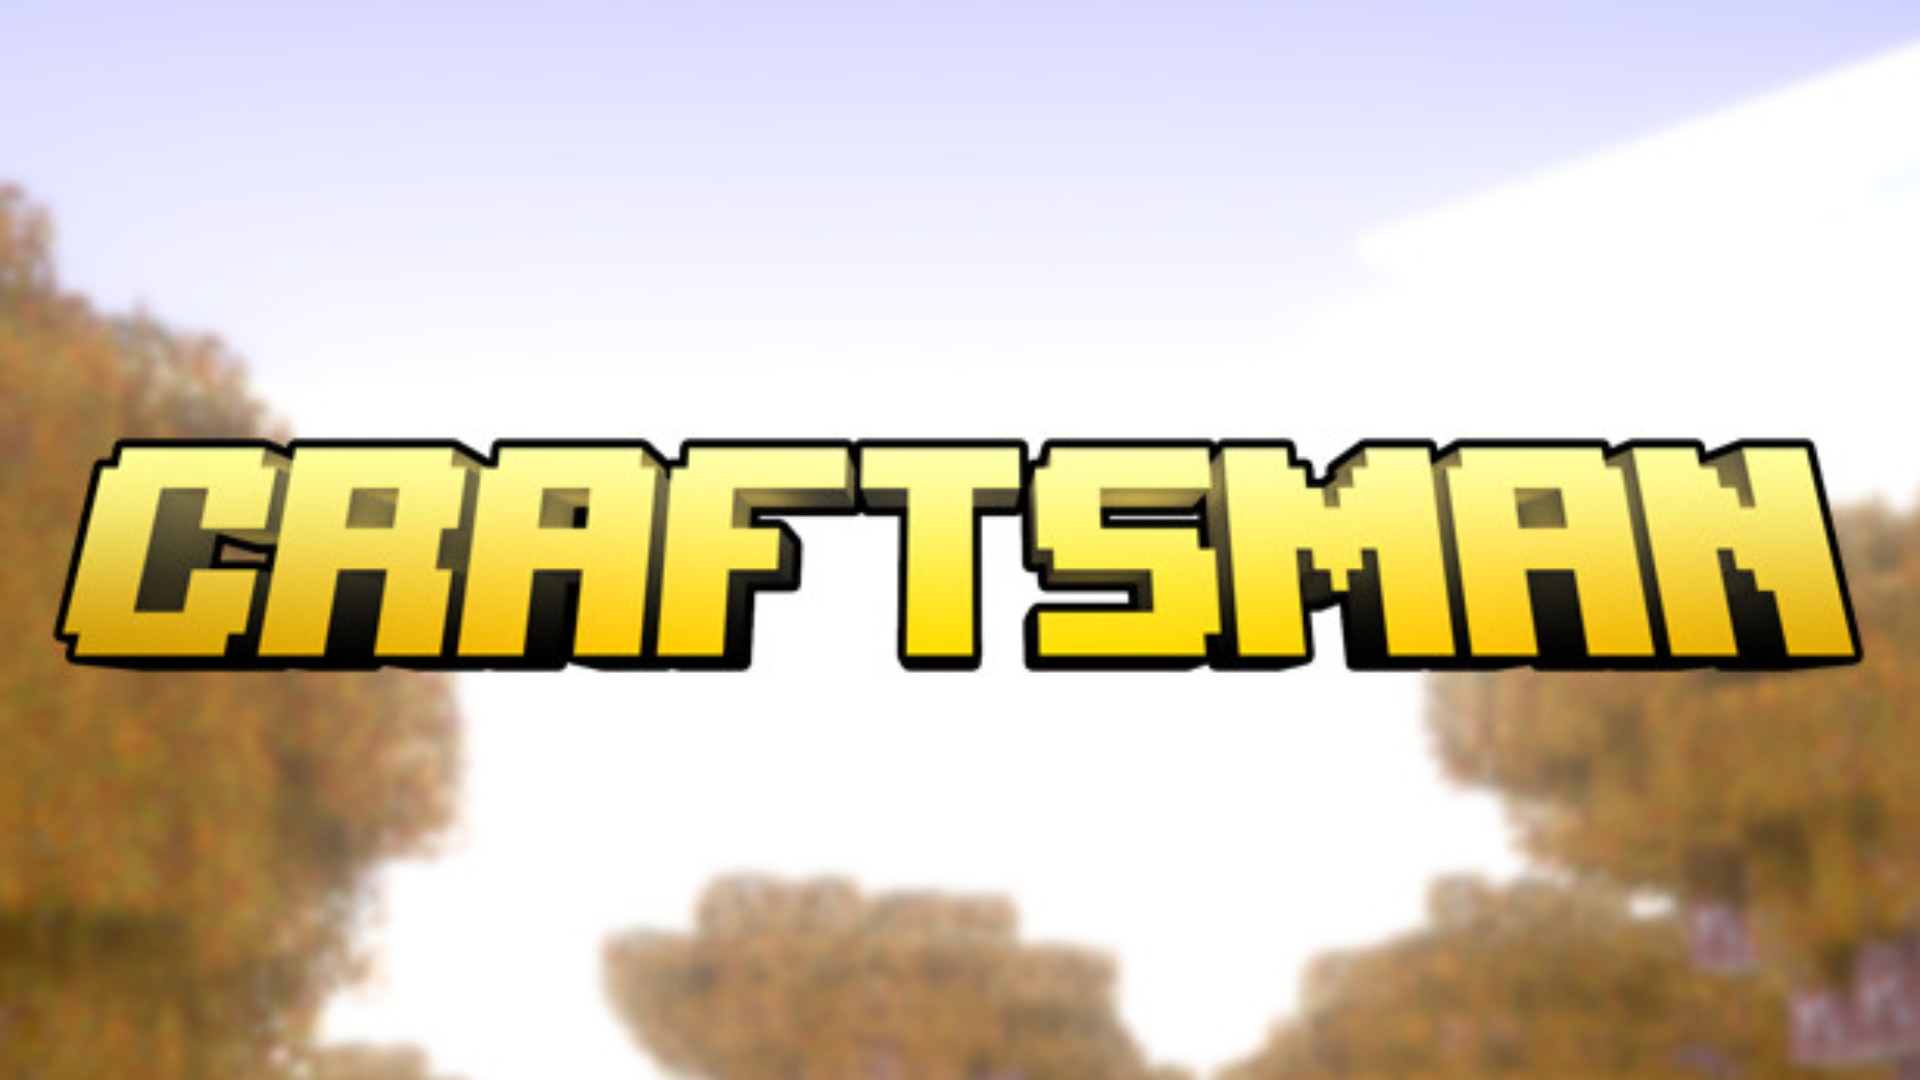 Craftsman: The Ultimate Crafting and Building Experience image